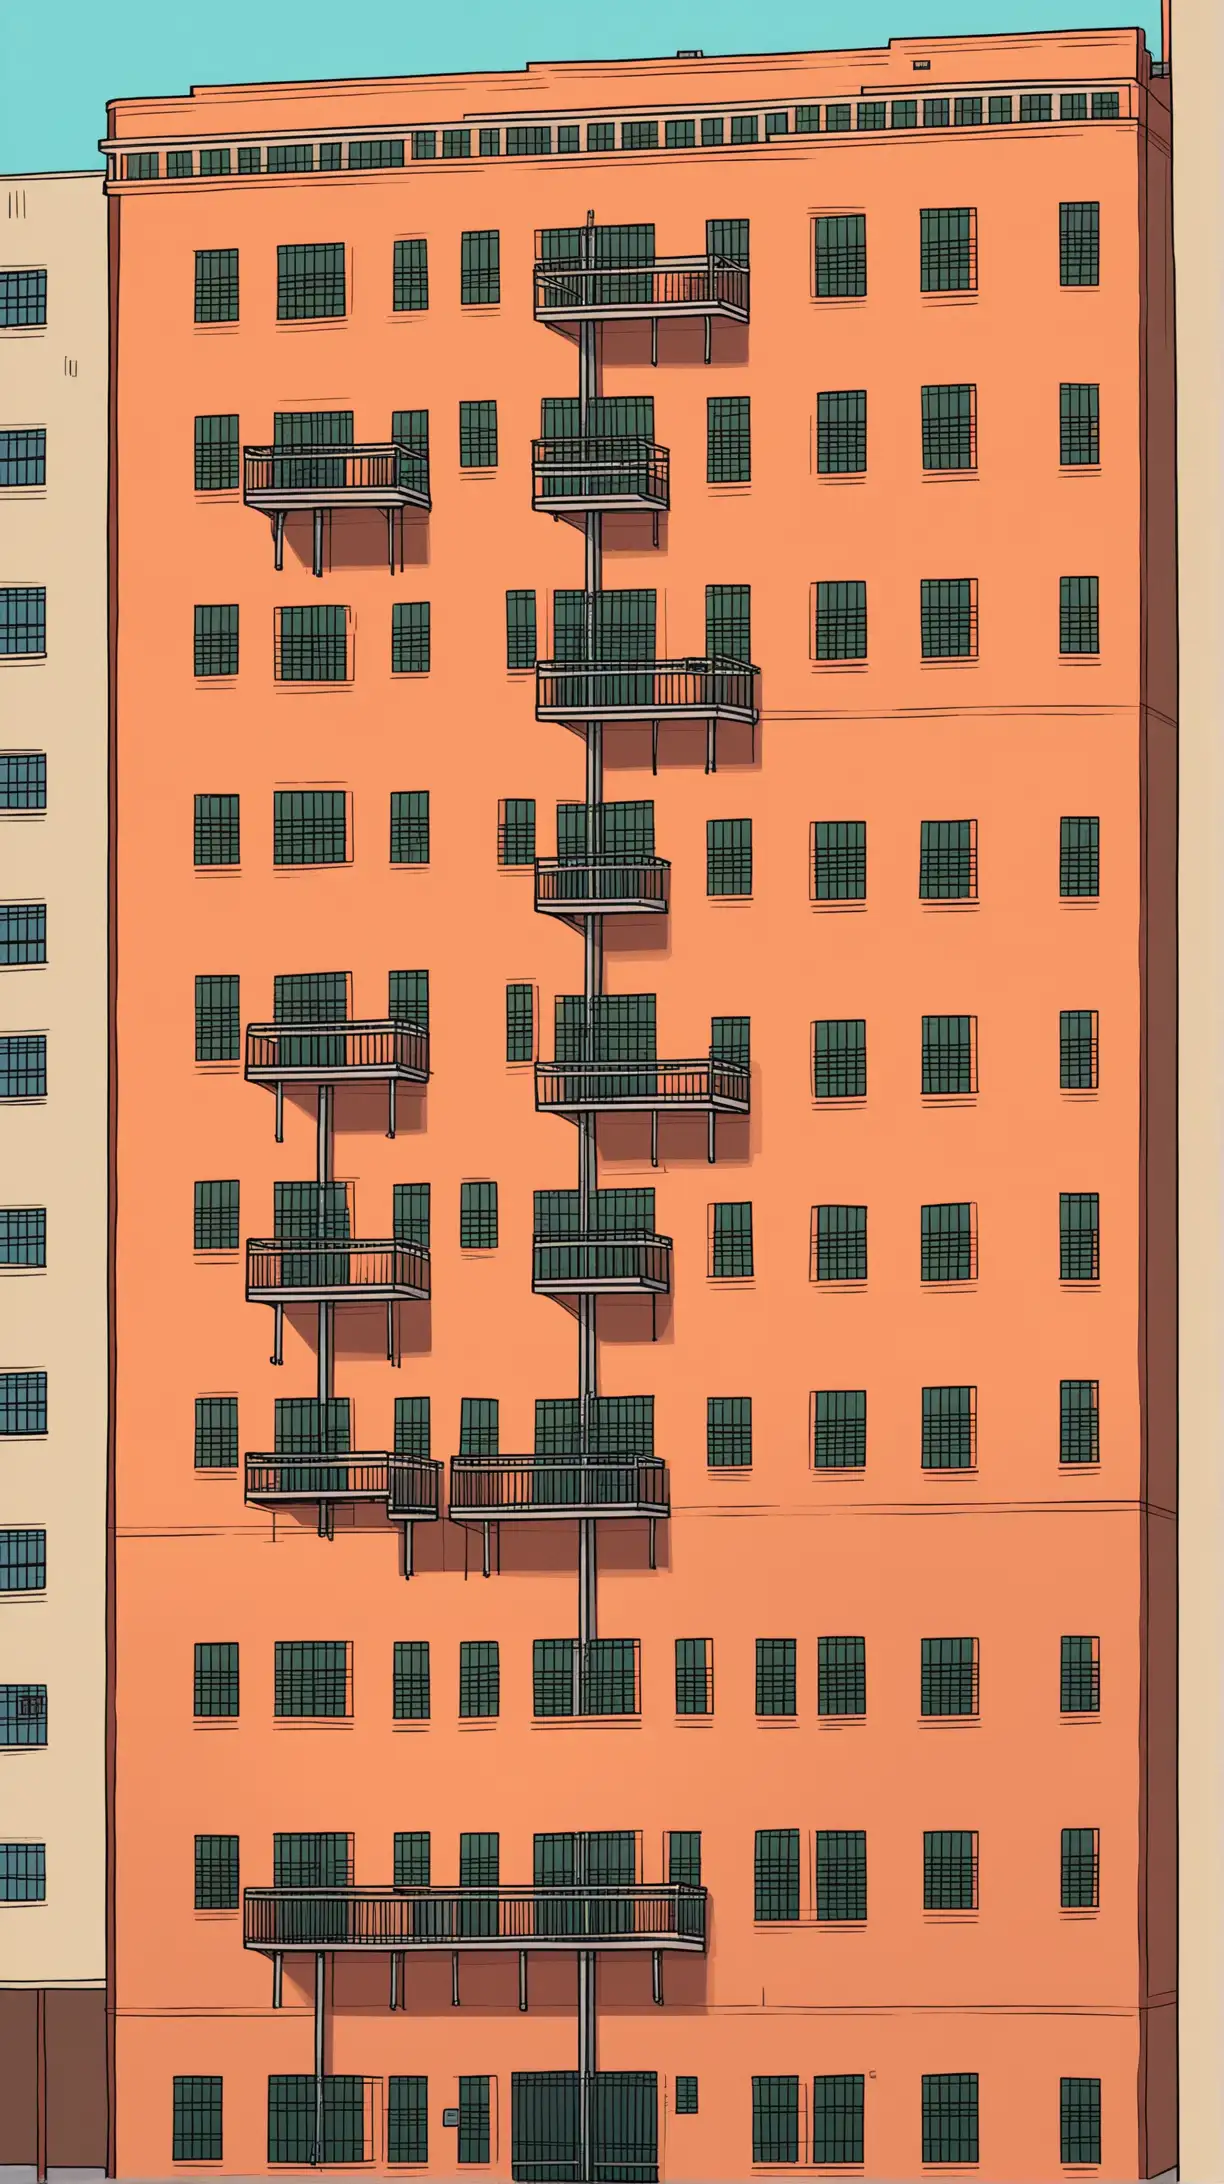 Whimsical Cartoon Illustration of a MultiStory Prison